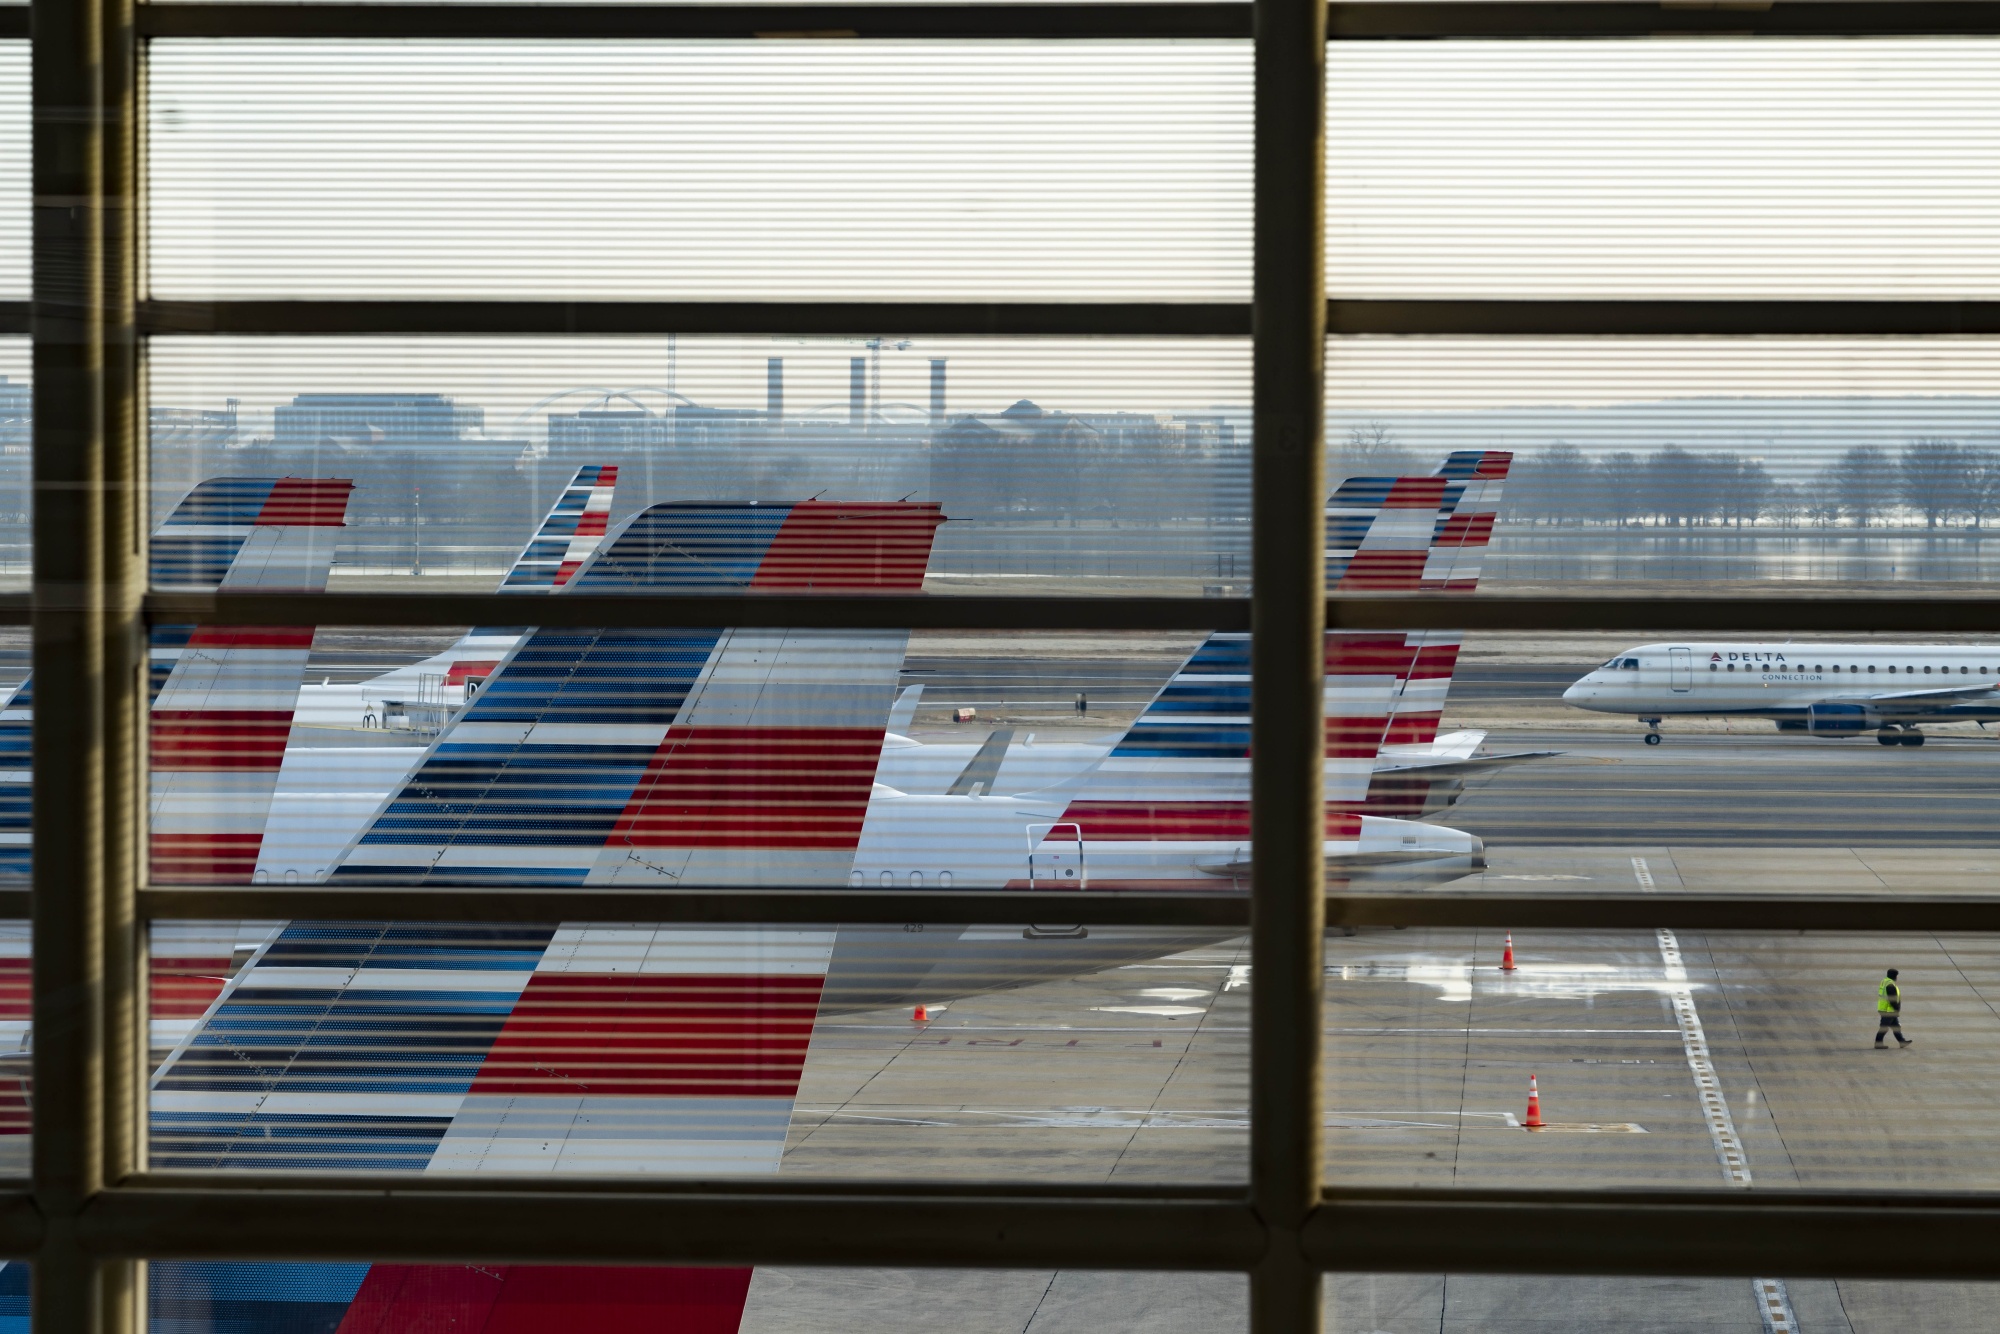 American Airlines says it could take 3 years to get back to full nationwide  capacity